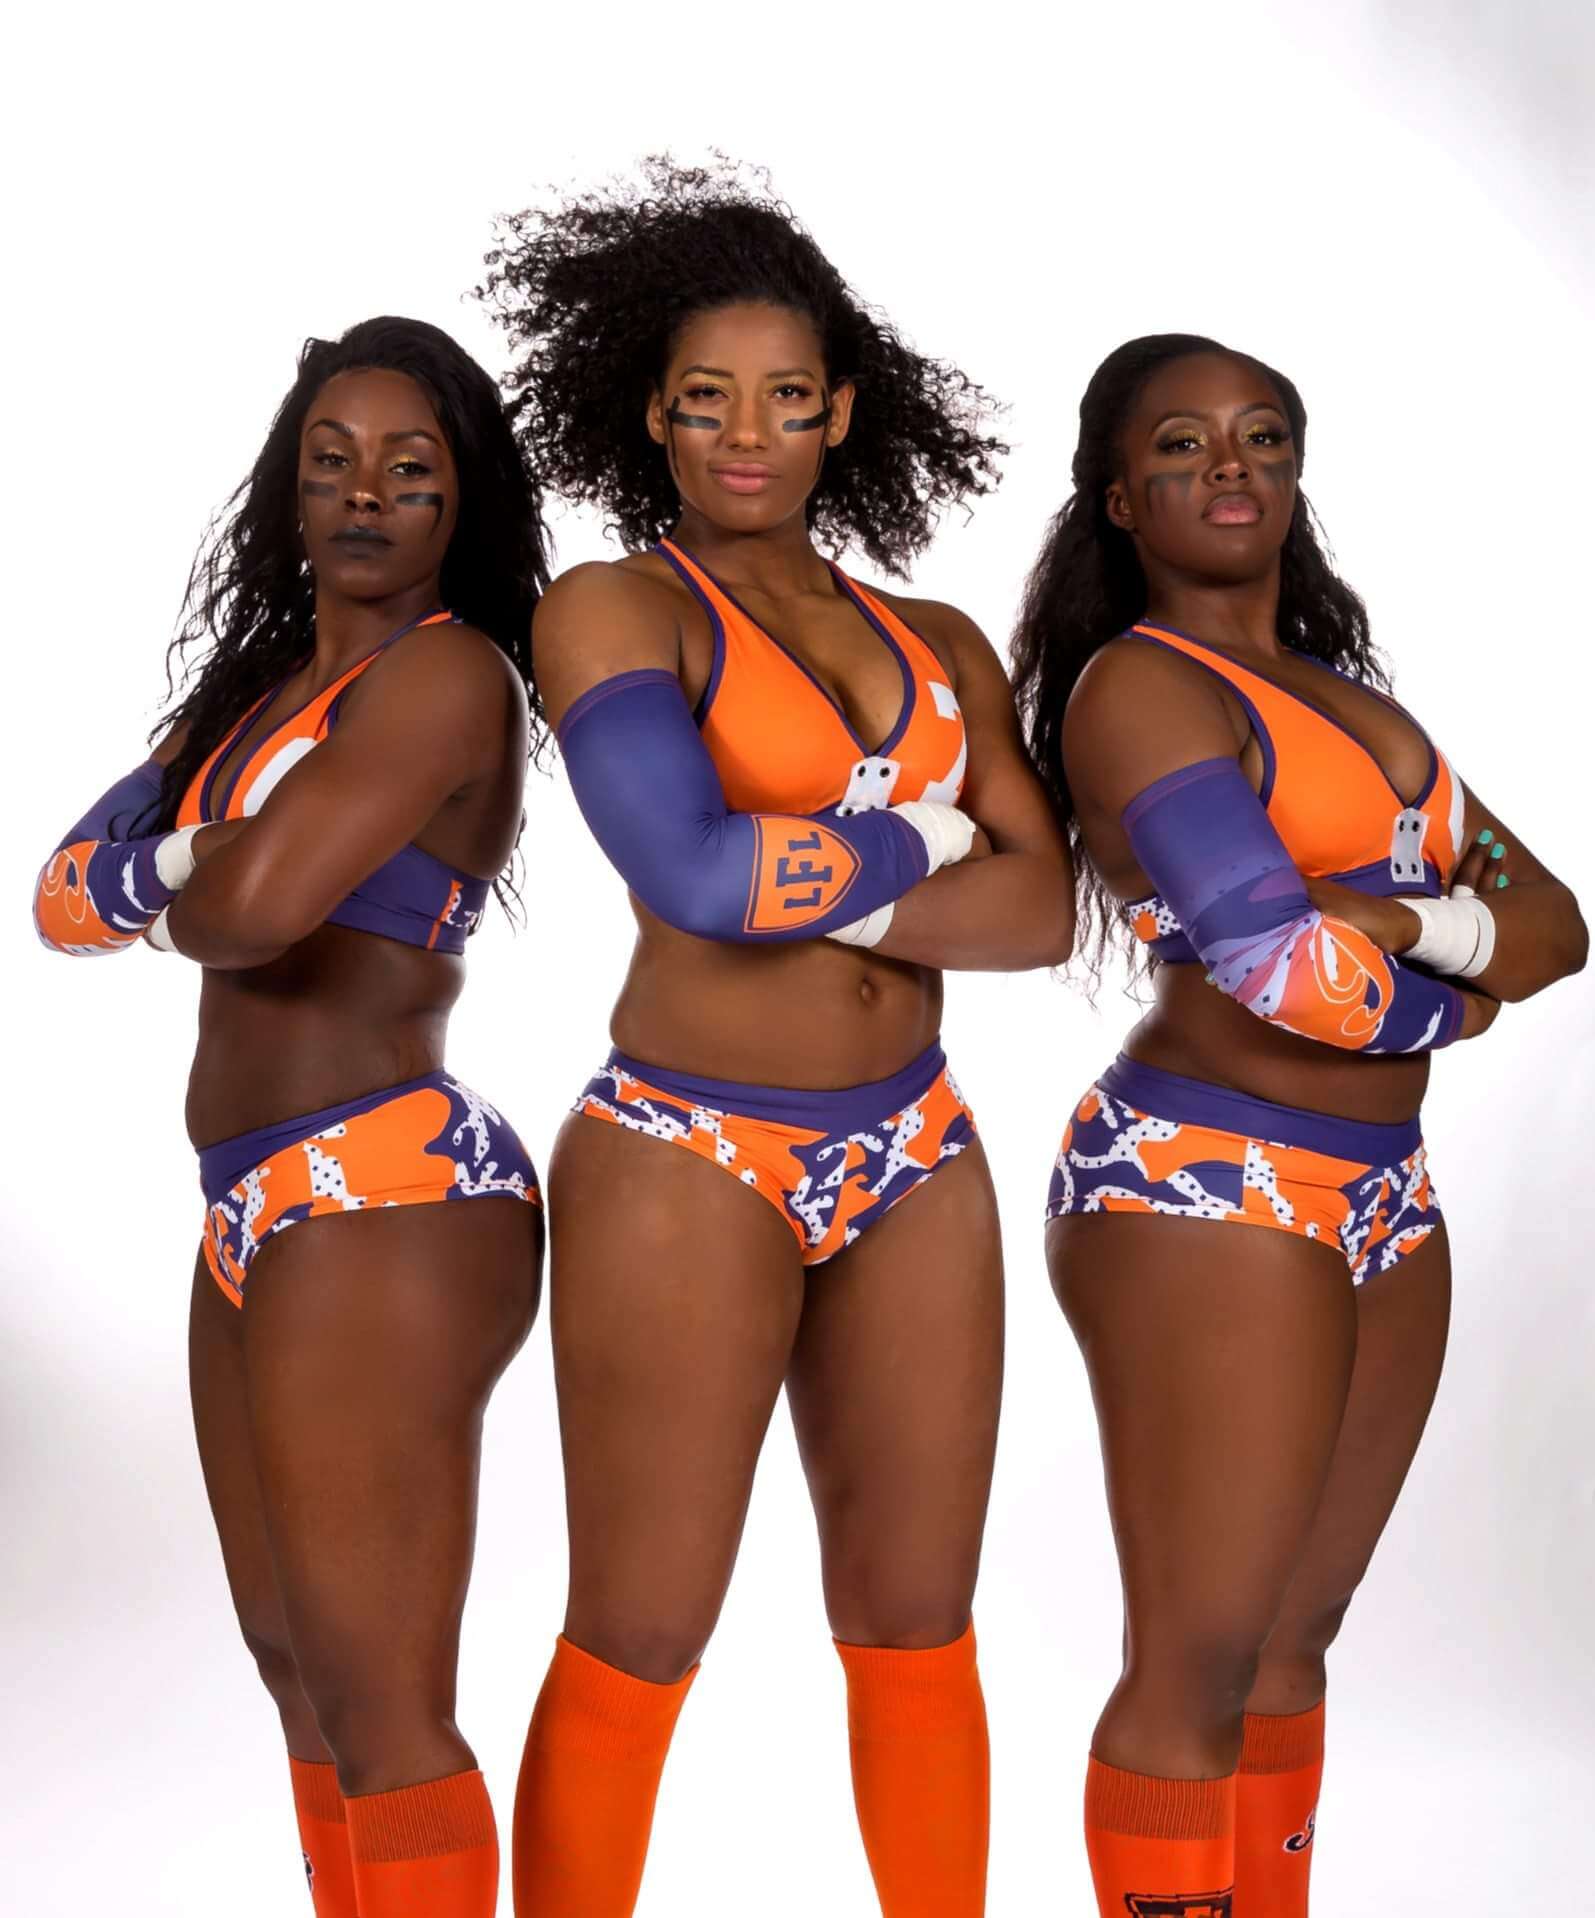 The Legends Football League Beautiful Women And Football, Need We Say Anymore! 7